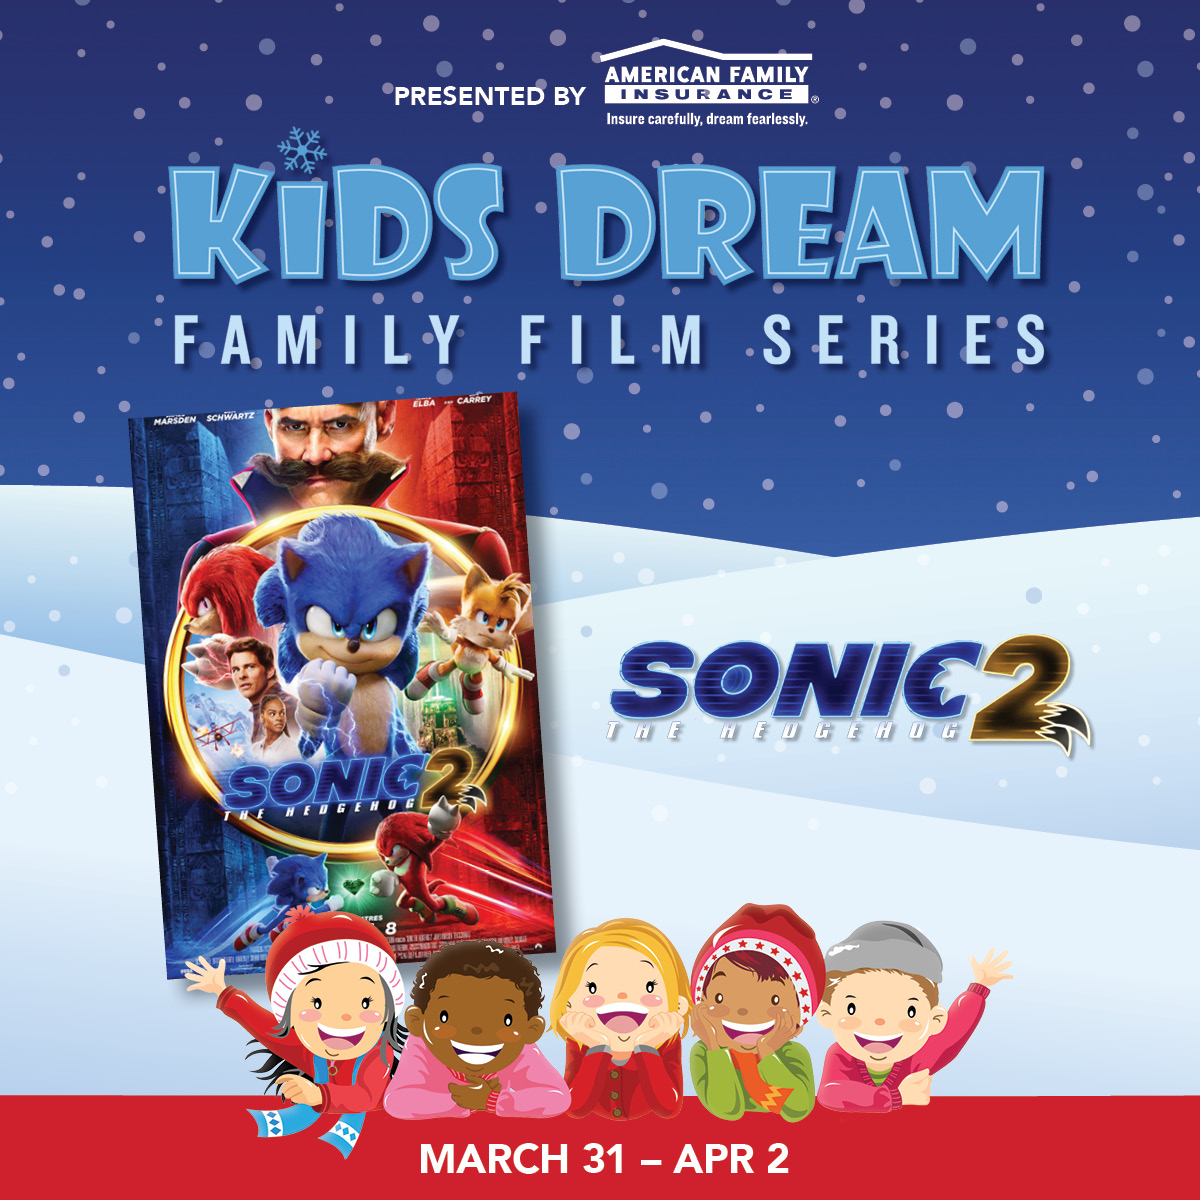 Don’t blink. You might miss it! Sonic the Hedgehog 2 is back at Marcus Theatres March 31 – April 2 as the last movie of our #KidsDreamFilmSeries, presented by American Family Insurance. Free tickets here https://t.co/zUIZEntFh9 https://t.co/4jjqTD62DS